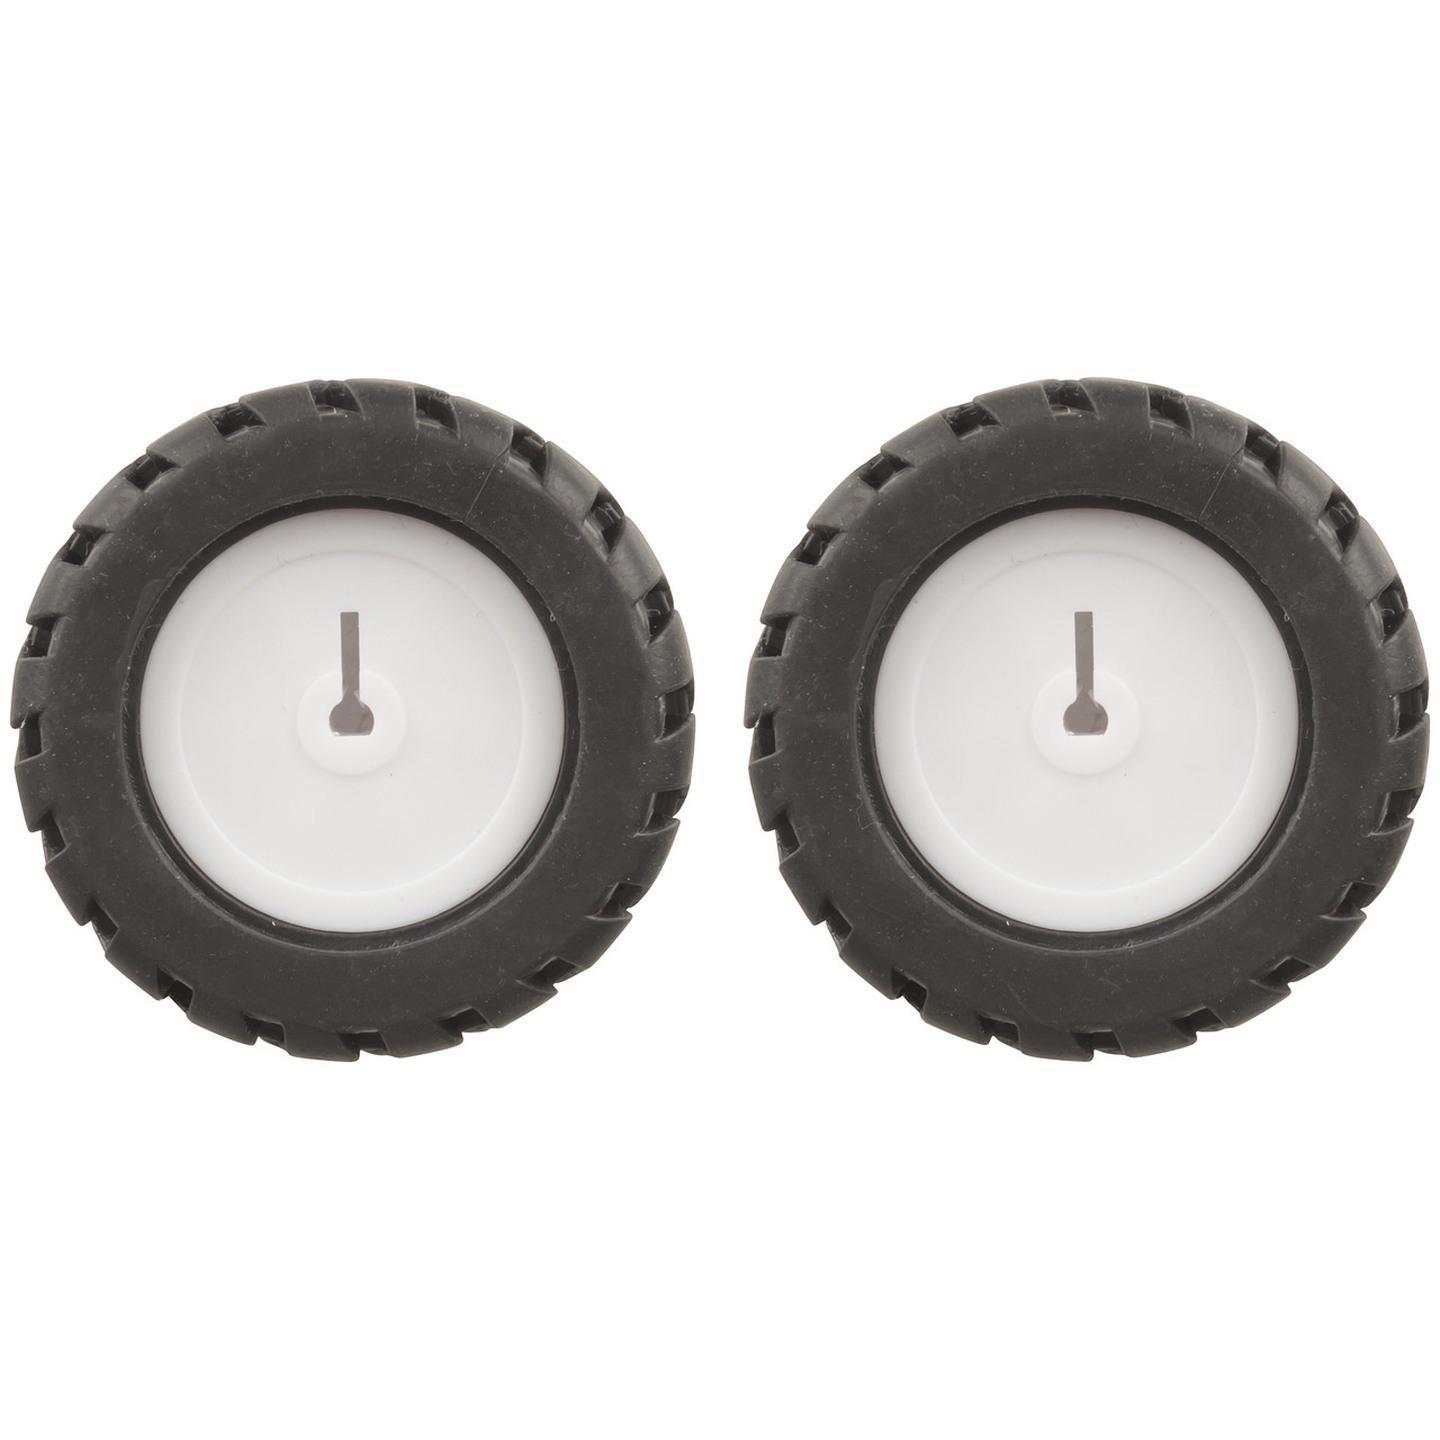 Duinotech Micro Wheels Tyres - Sold as a Pair